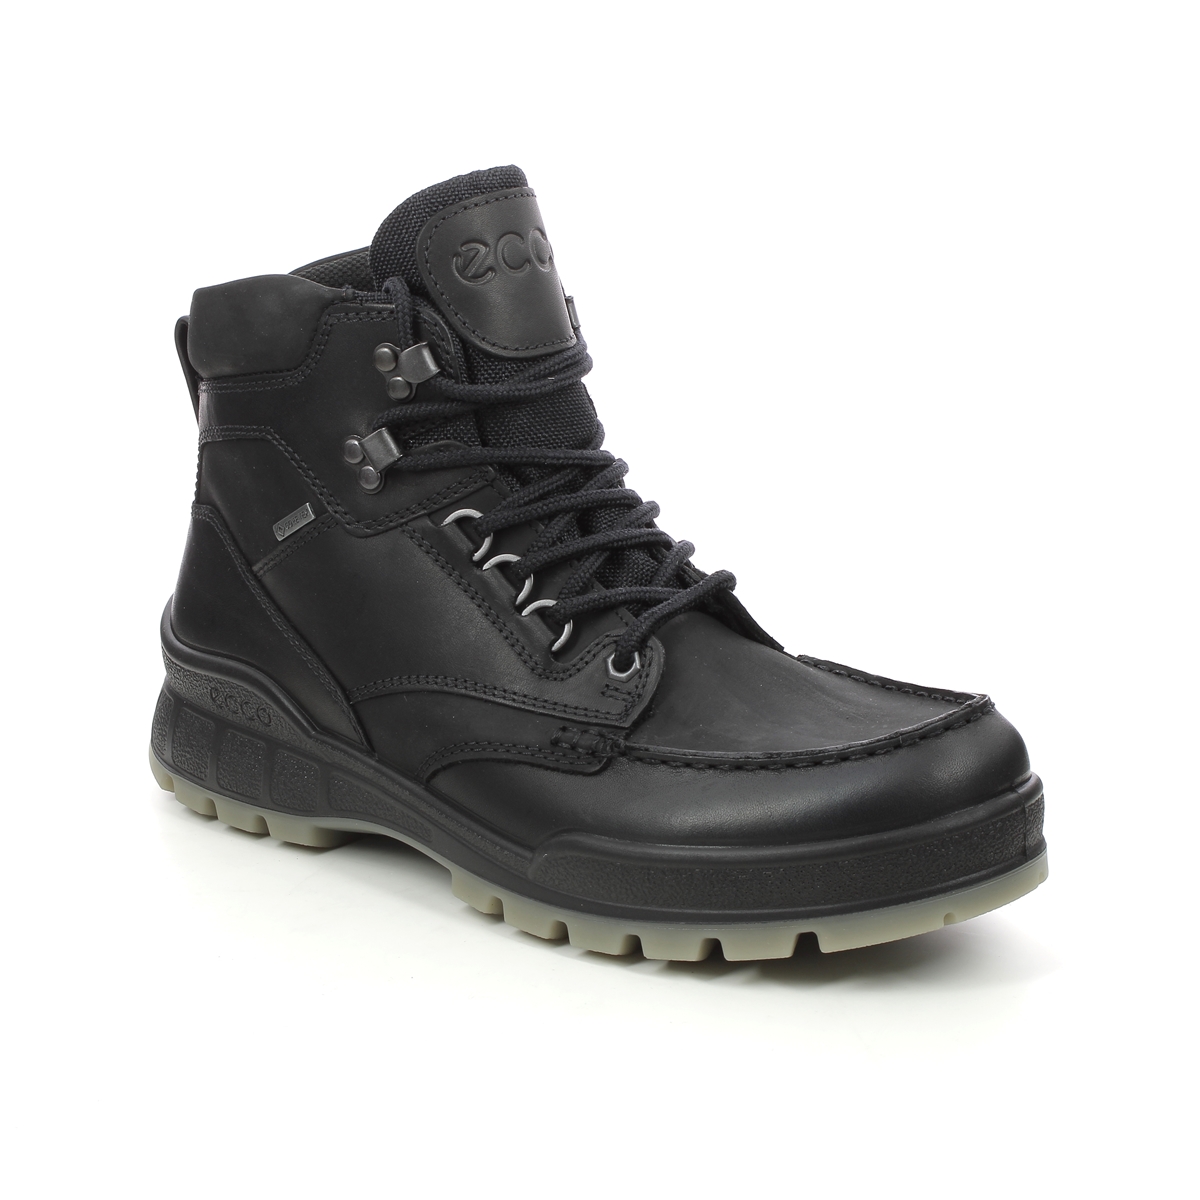 Ecco Track 25 Boot Gtx Black Leather Mens Outdoor Walking Boots 831704-51052 In Size 47 In Plain Black Leather